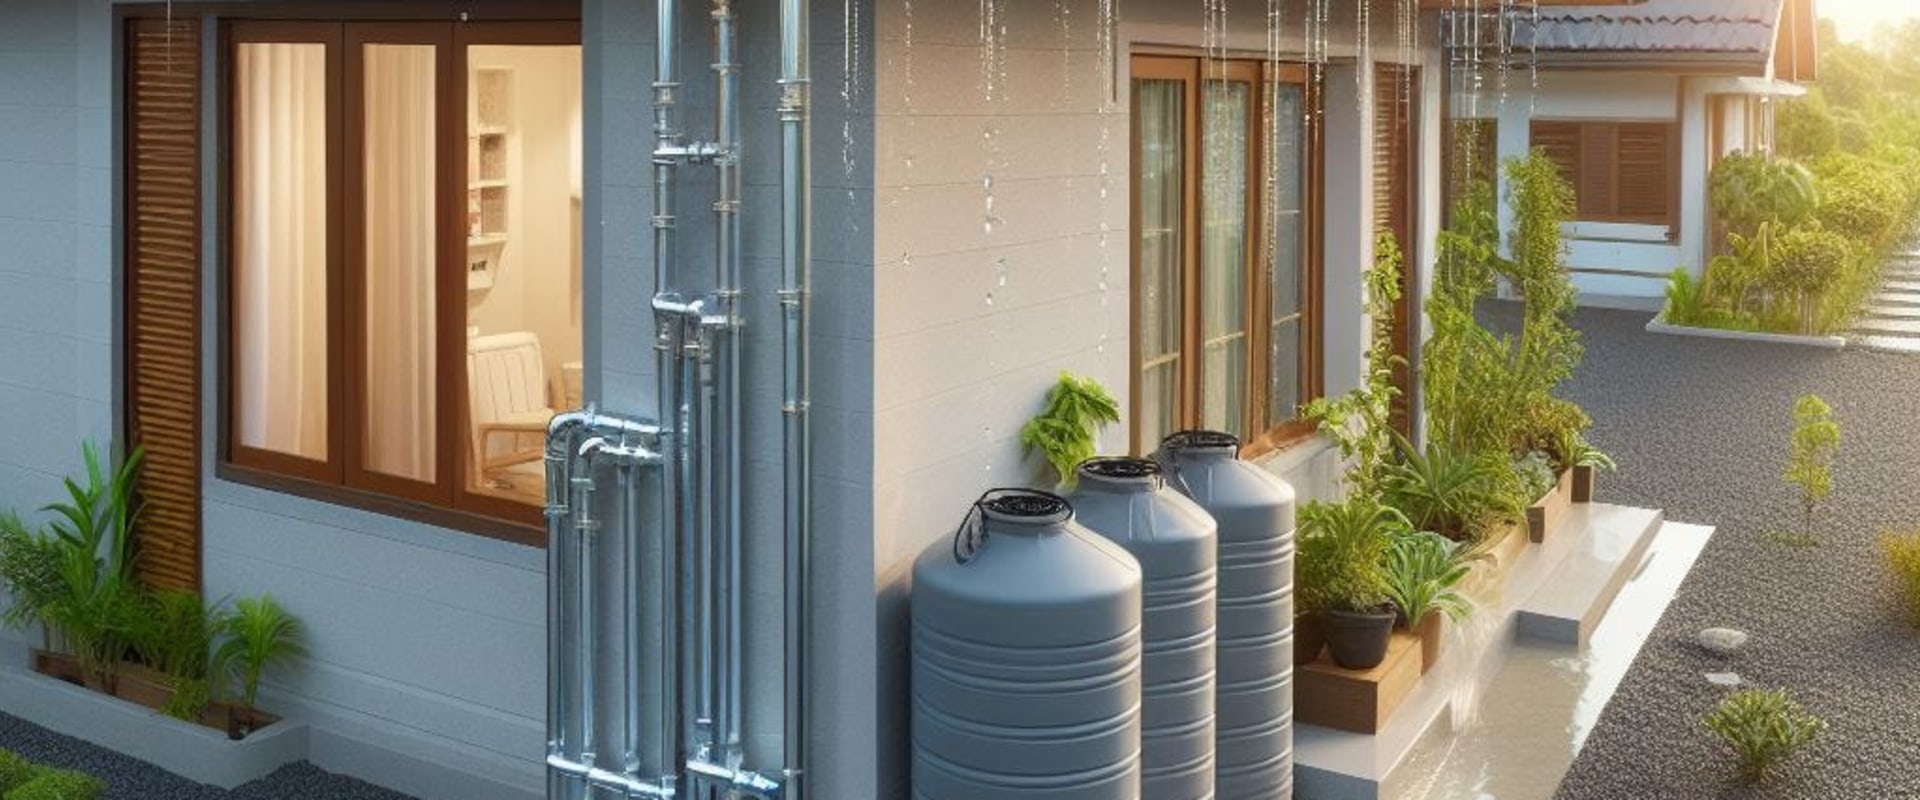 How to Make Your Home More Environmentally Friendly with Rainwater Harvesting